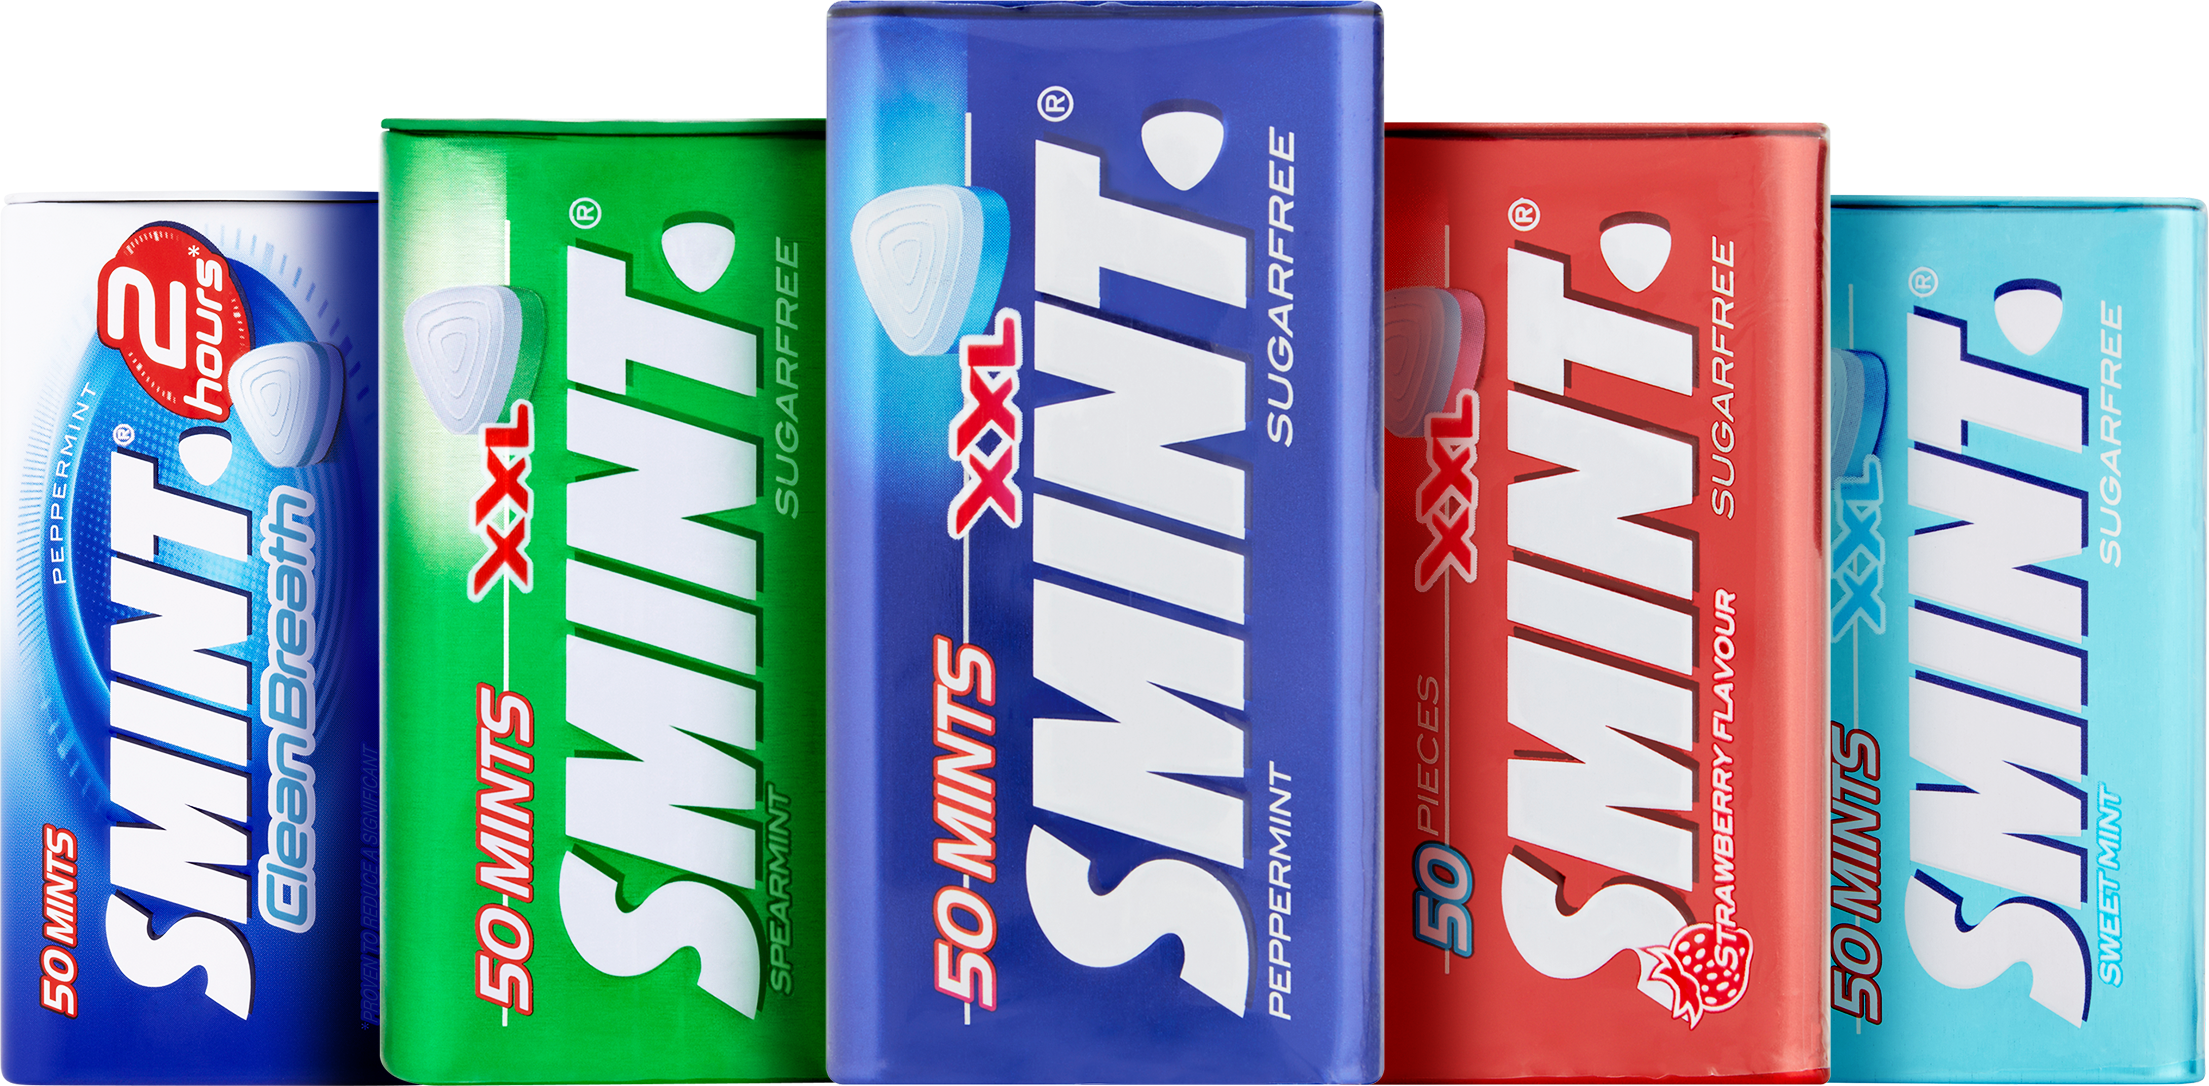 Smint: Mint brand in the UK